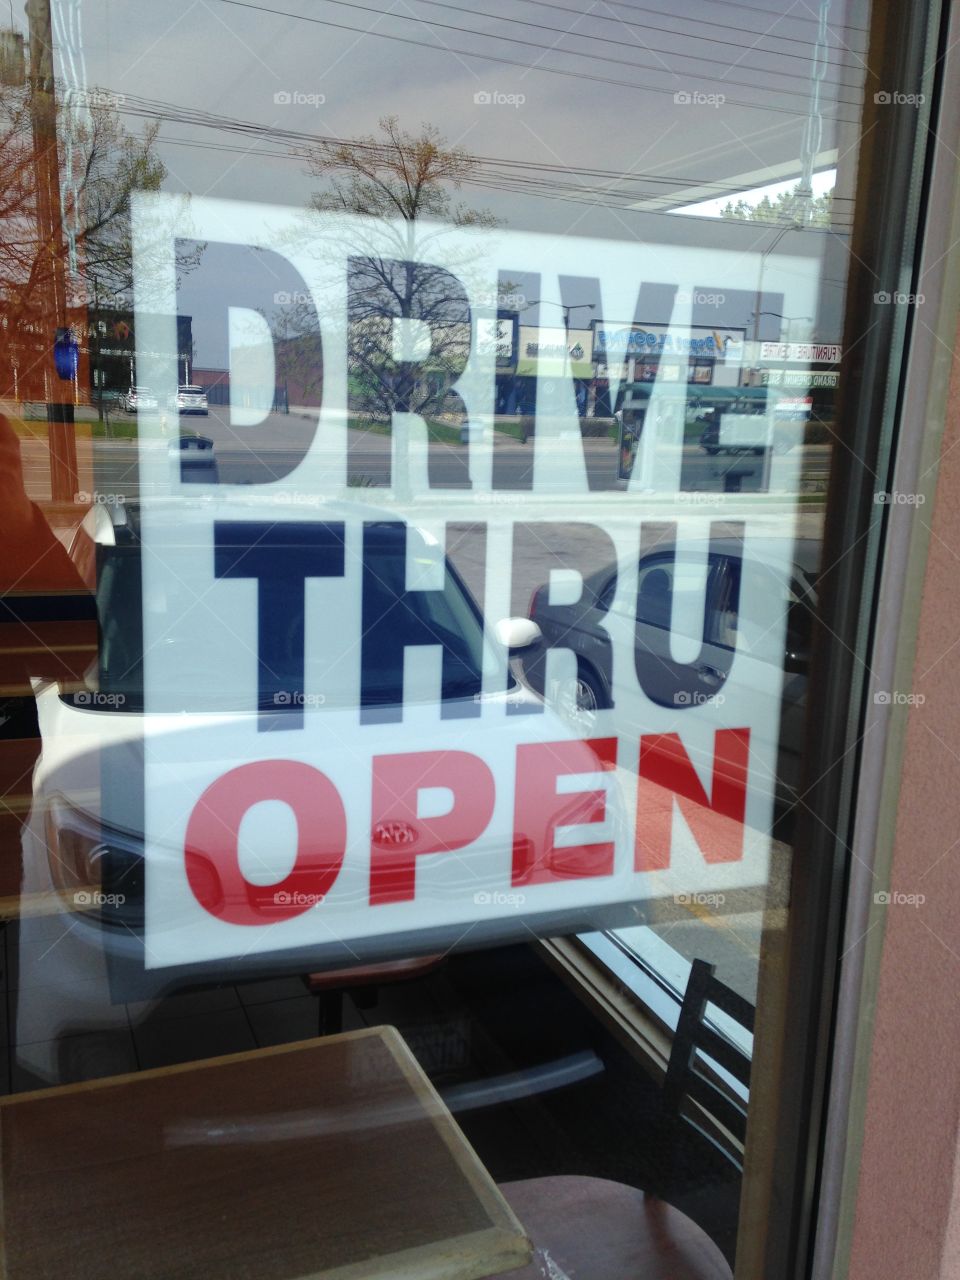 DRIVE THRU OPEN - light up window sign from a fast food restsurant